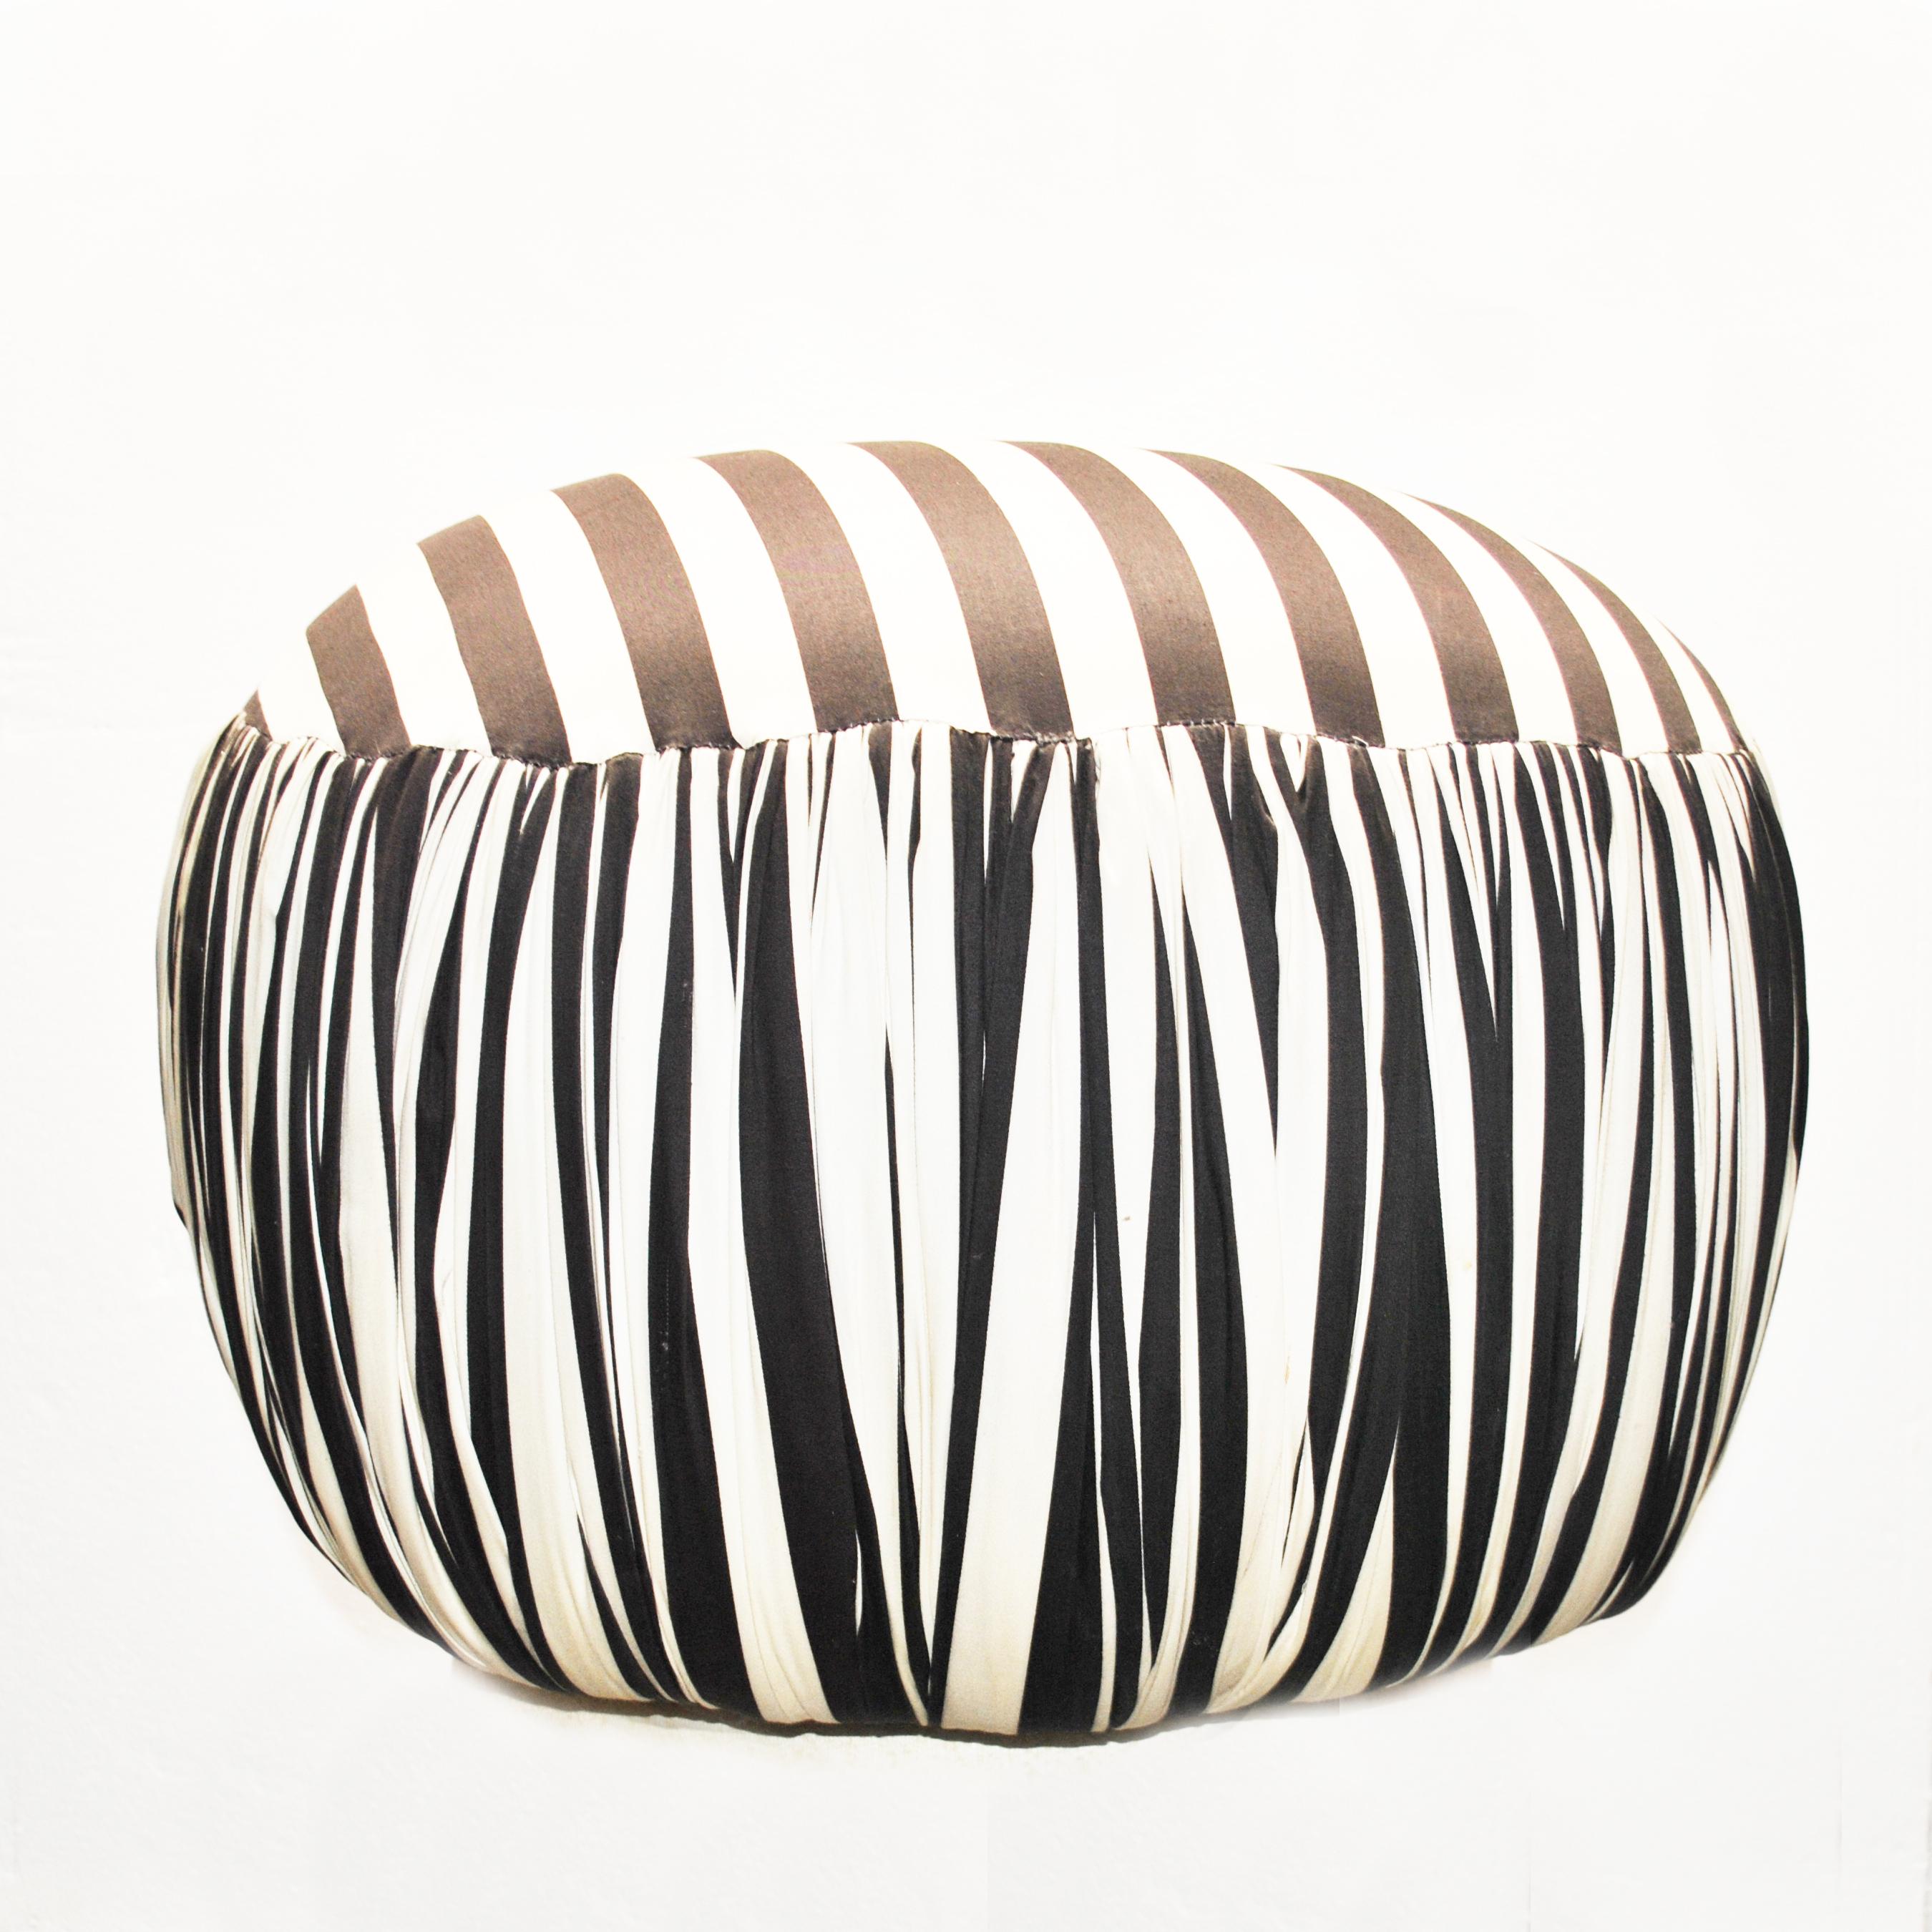 A round contemporary pouf or ottoman in black and white striped fabric with pleated sides.